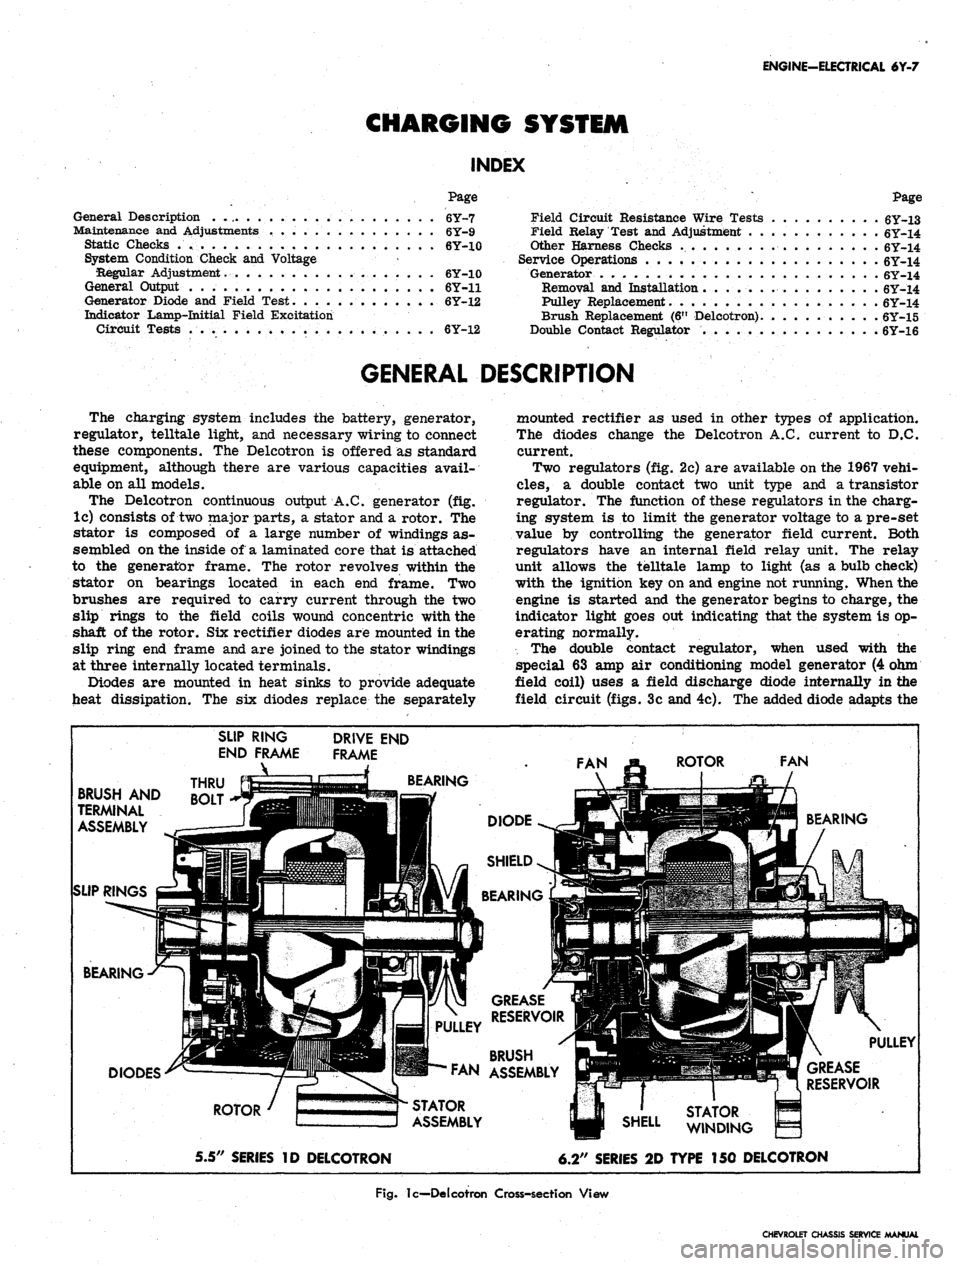 CHEVROLET CAMARO 1967 1.G Chassis Workshop Manual 
ENGINE-ELECTRICAL 6Y-7

CHARGING SYSTEM

INDEX

Page

General Description . 6Y-7

Maintenance and Adjustments 6Y-9

Static Checks . 6Y-10

System Condition Check and Voltage

•Regular Adjustment. 6